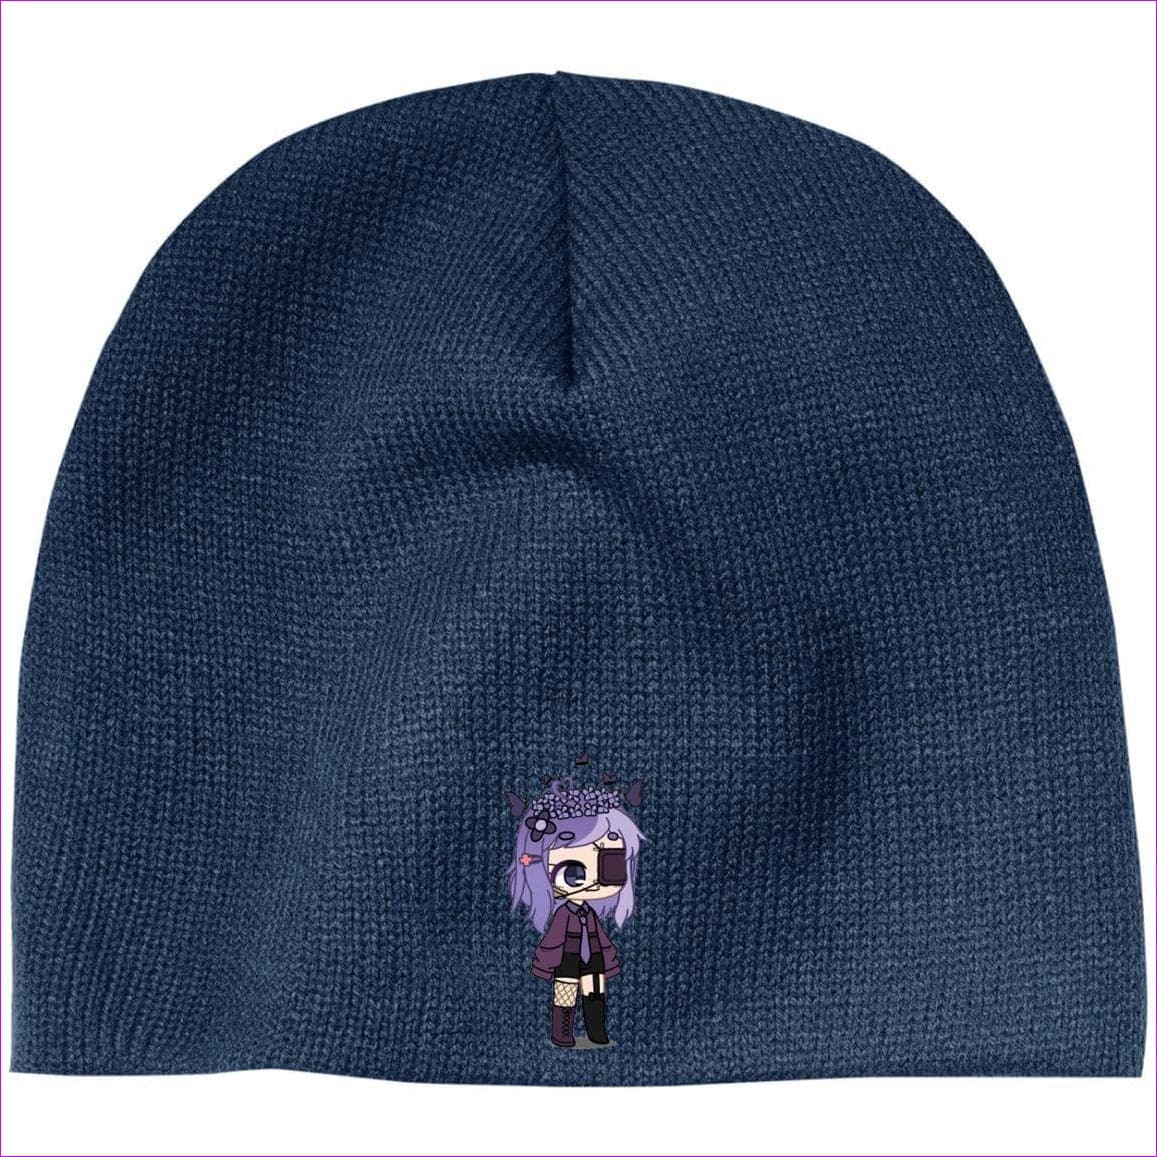 Acrylic Beanie Navy One Size - Embroidered Slouch Beanie - Beanie at TFC&H Co.